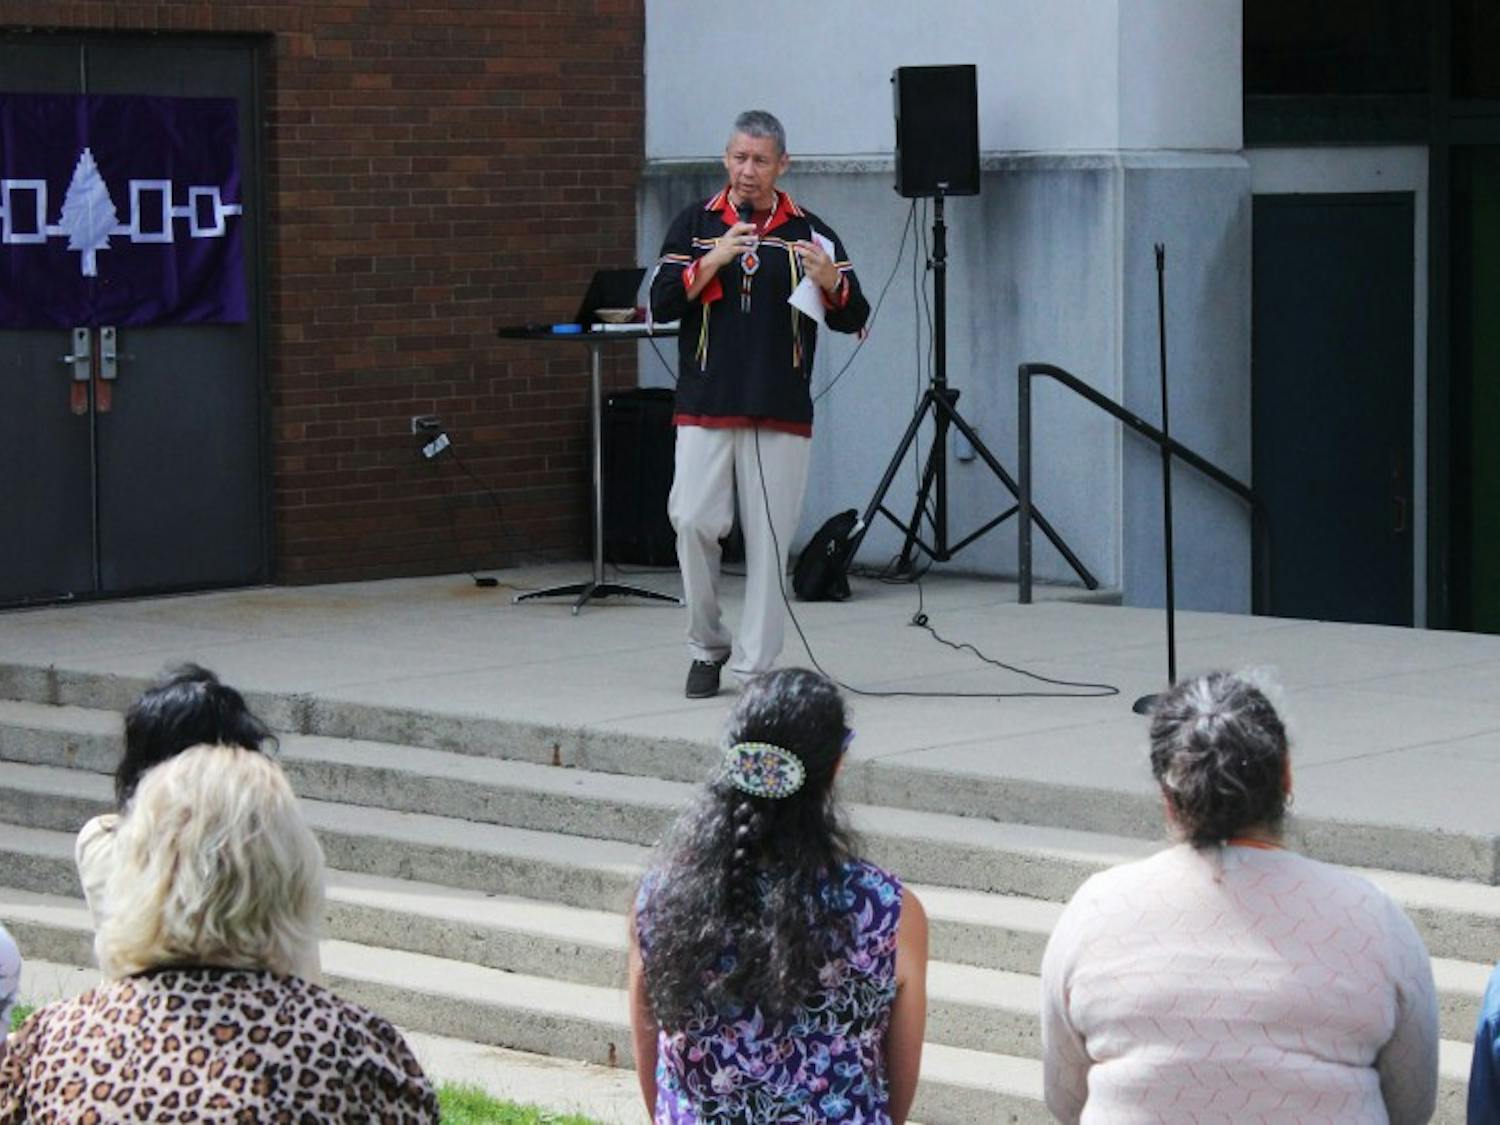 Pete Hill, ‘91 alum and “All Our Relations” director of the Native American Communities Services of Erie & Niagara Counties, speaks at the Native American welcome event outside the Student Union. NACS will work with the Office of Inclusive Excellence and faculty members this year to bring more inclusive events to UB.